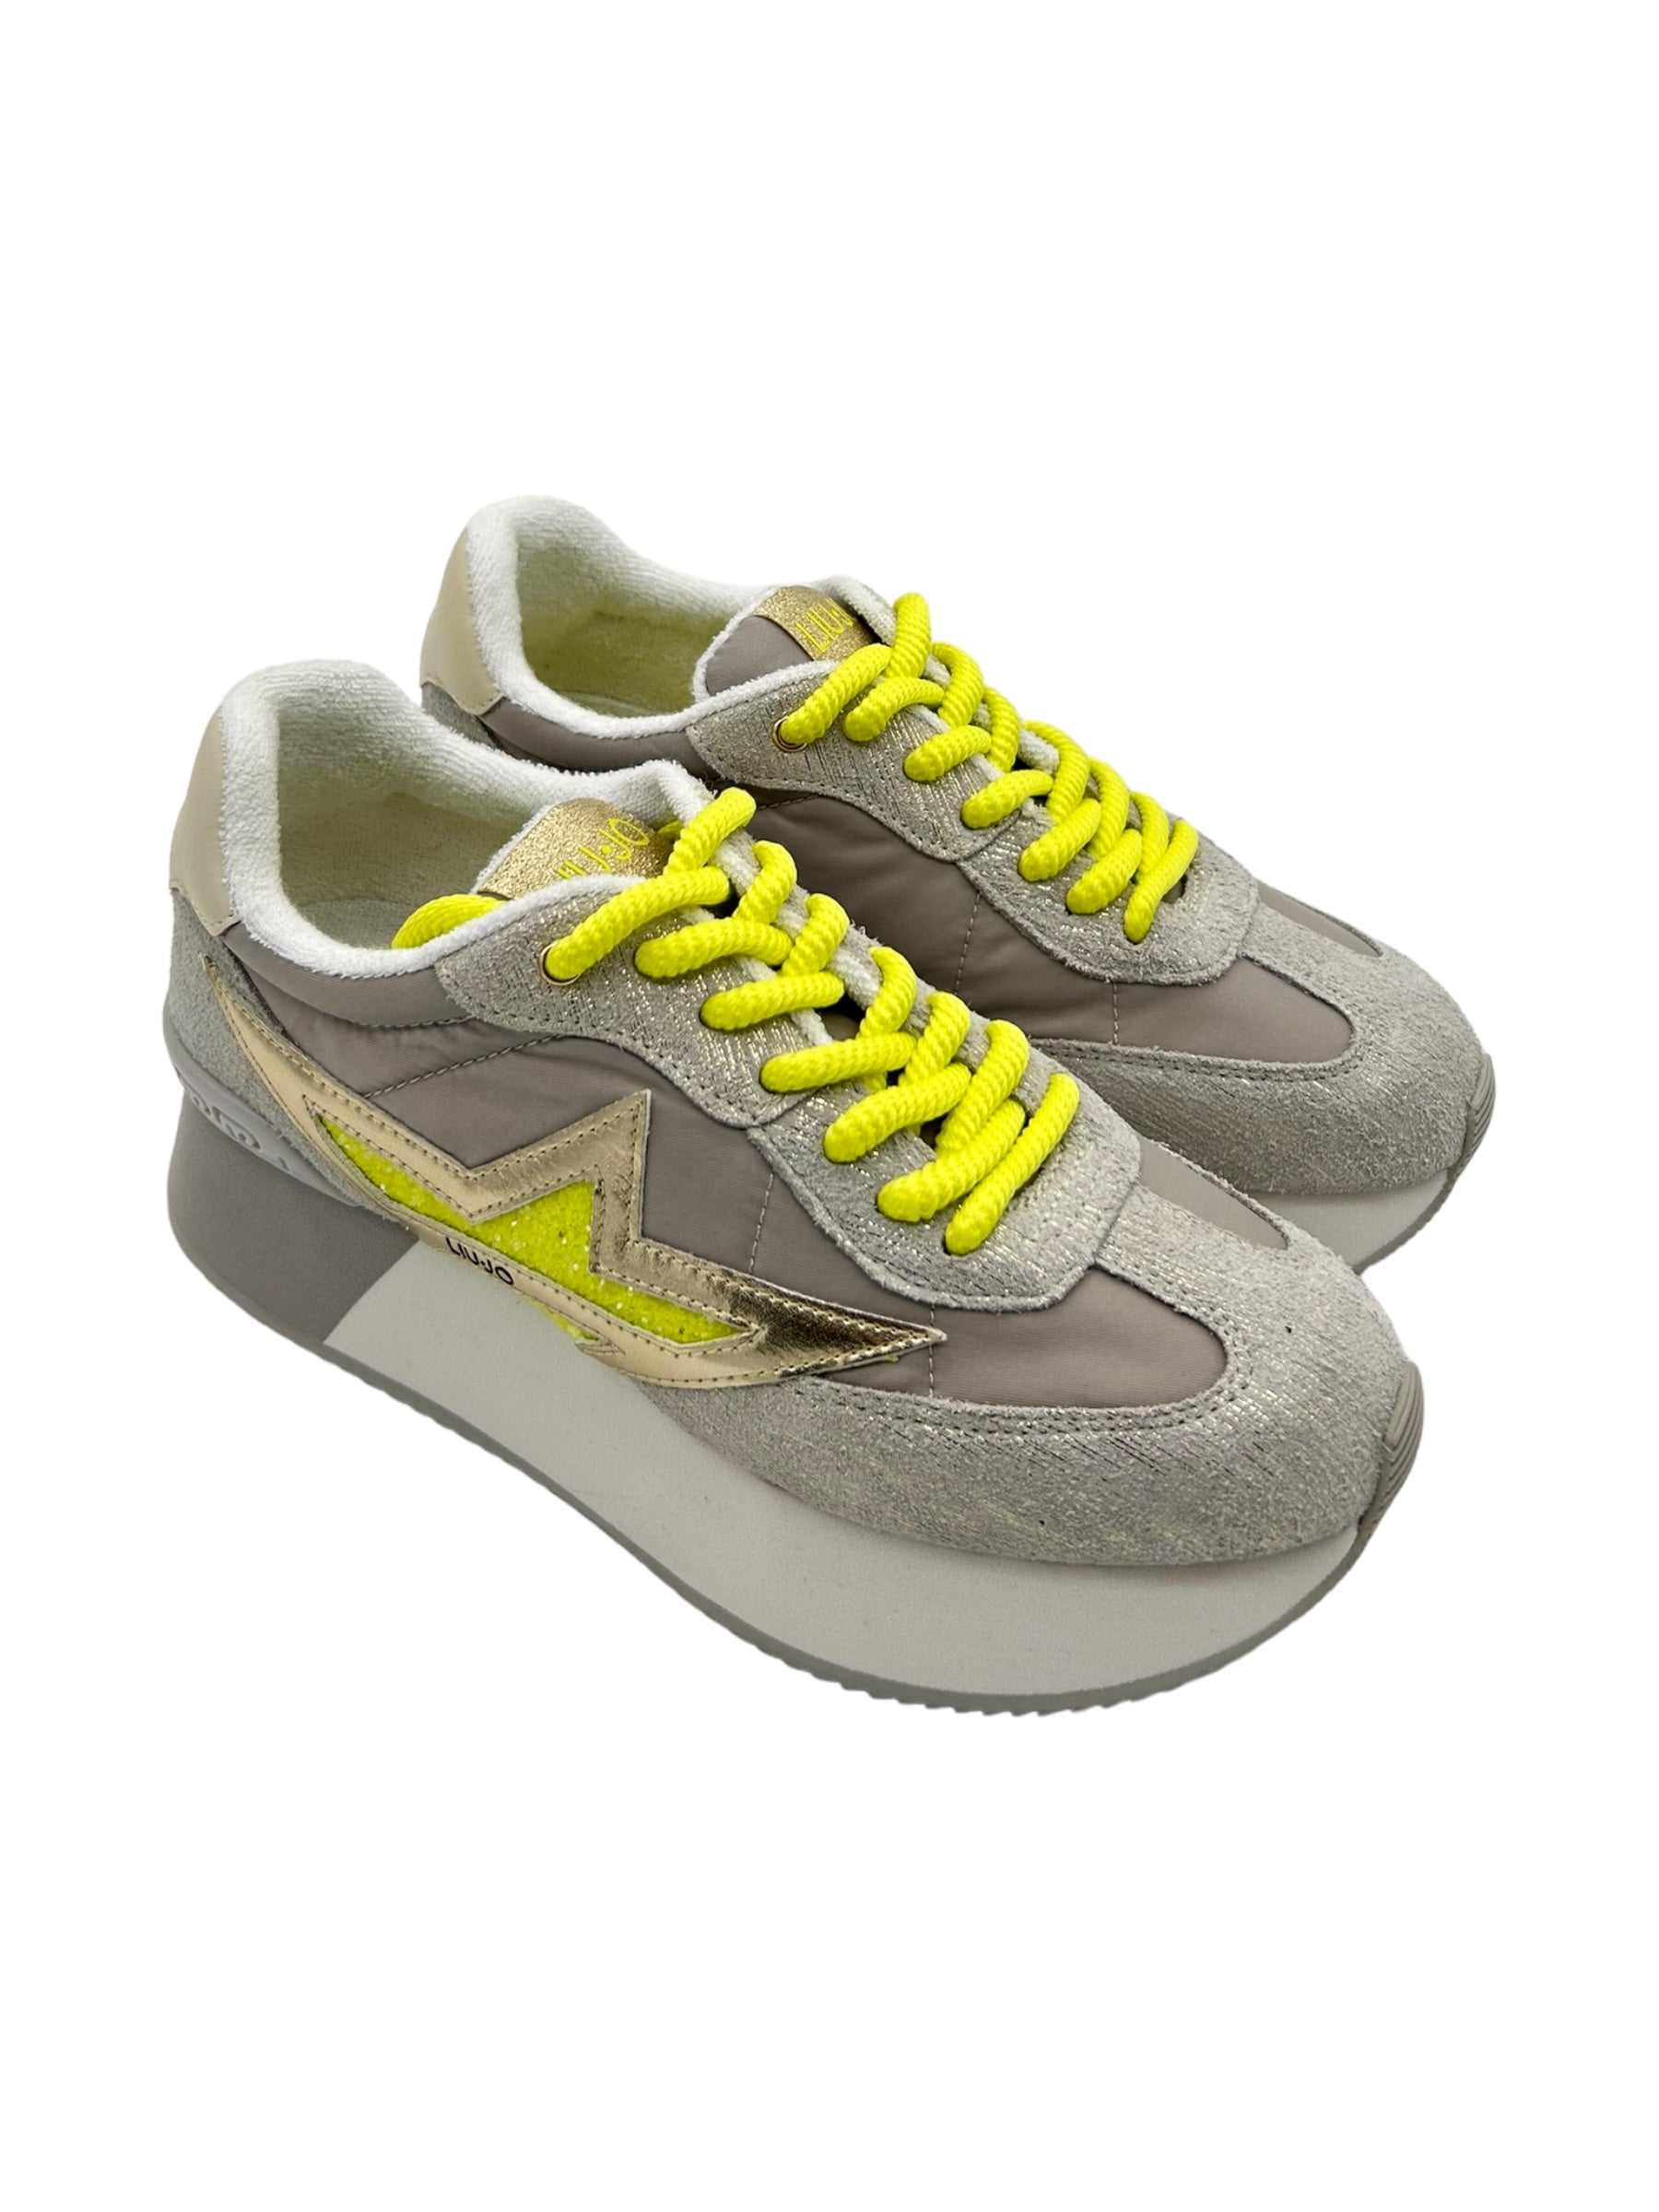 Sneakers LIUJO Laminated suede Light Gold Yellow Fluo - Dreamy 03 -